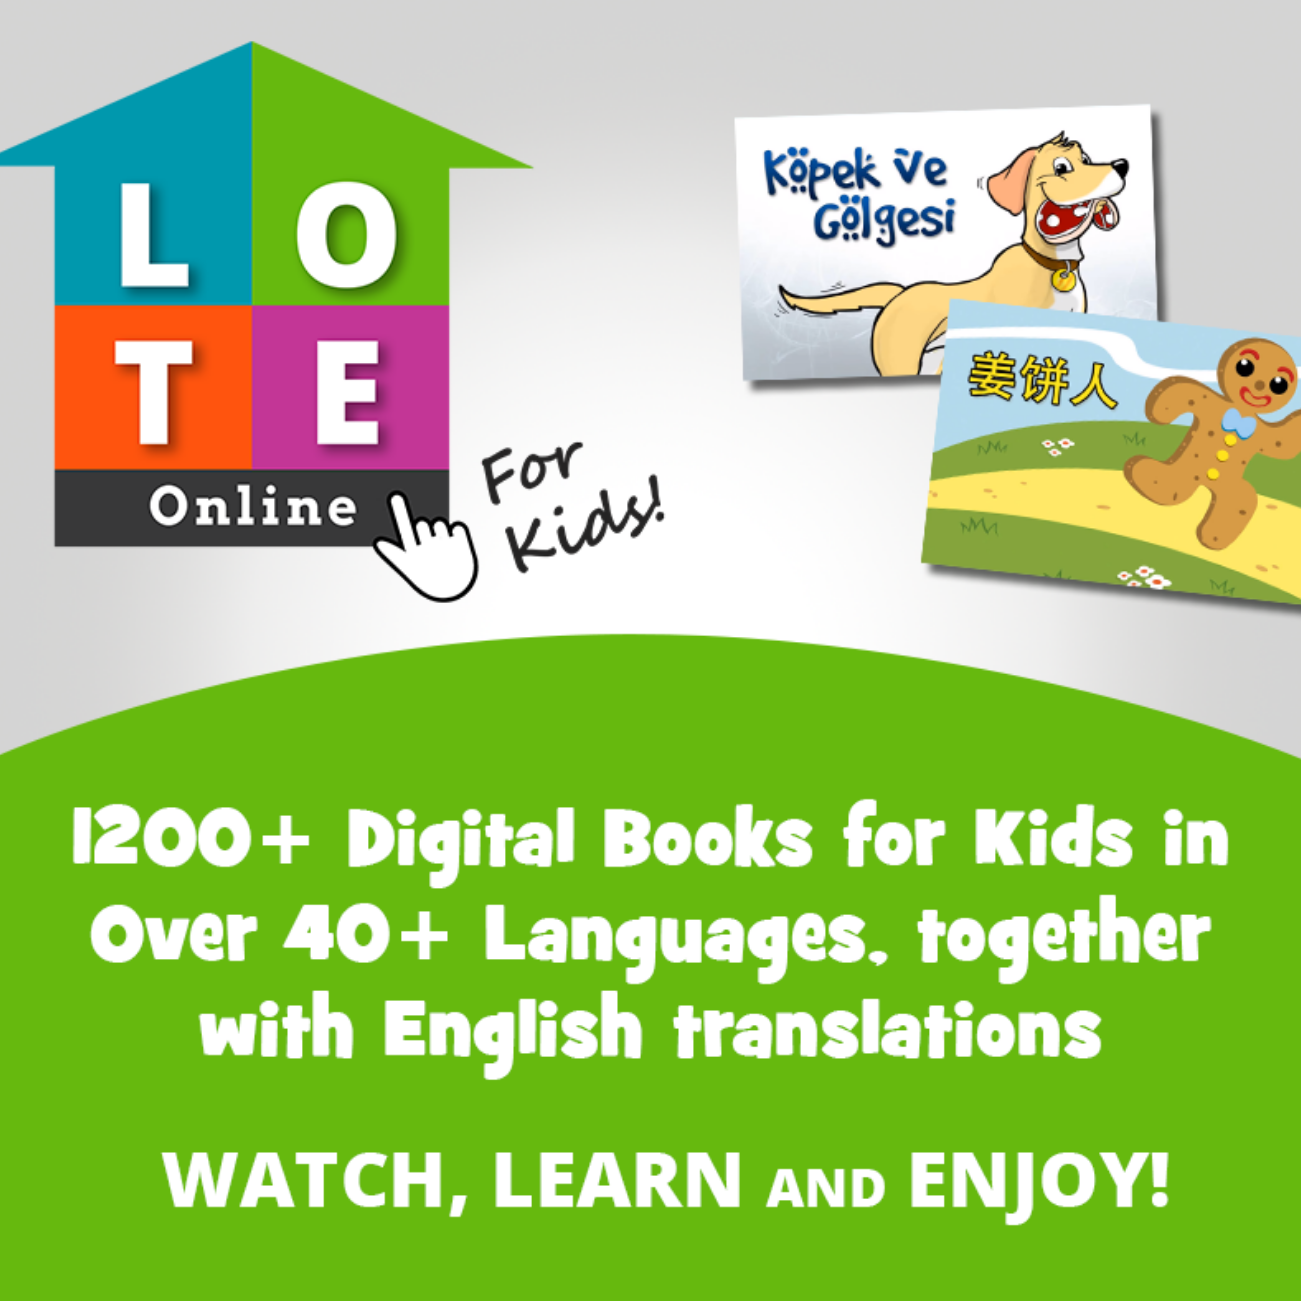 LOTE Online for Kids thumbnail image. 